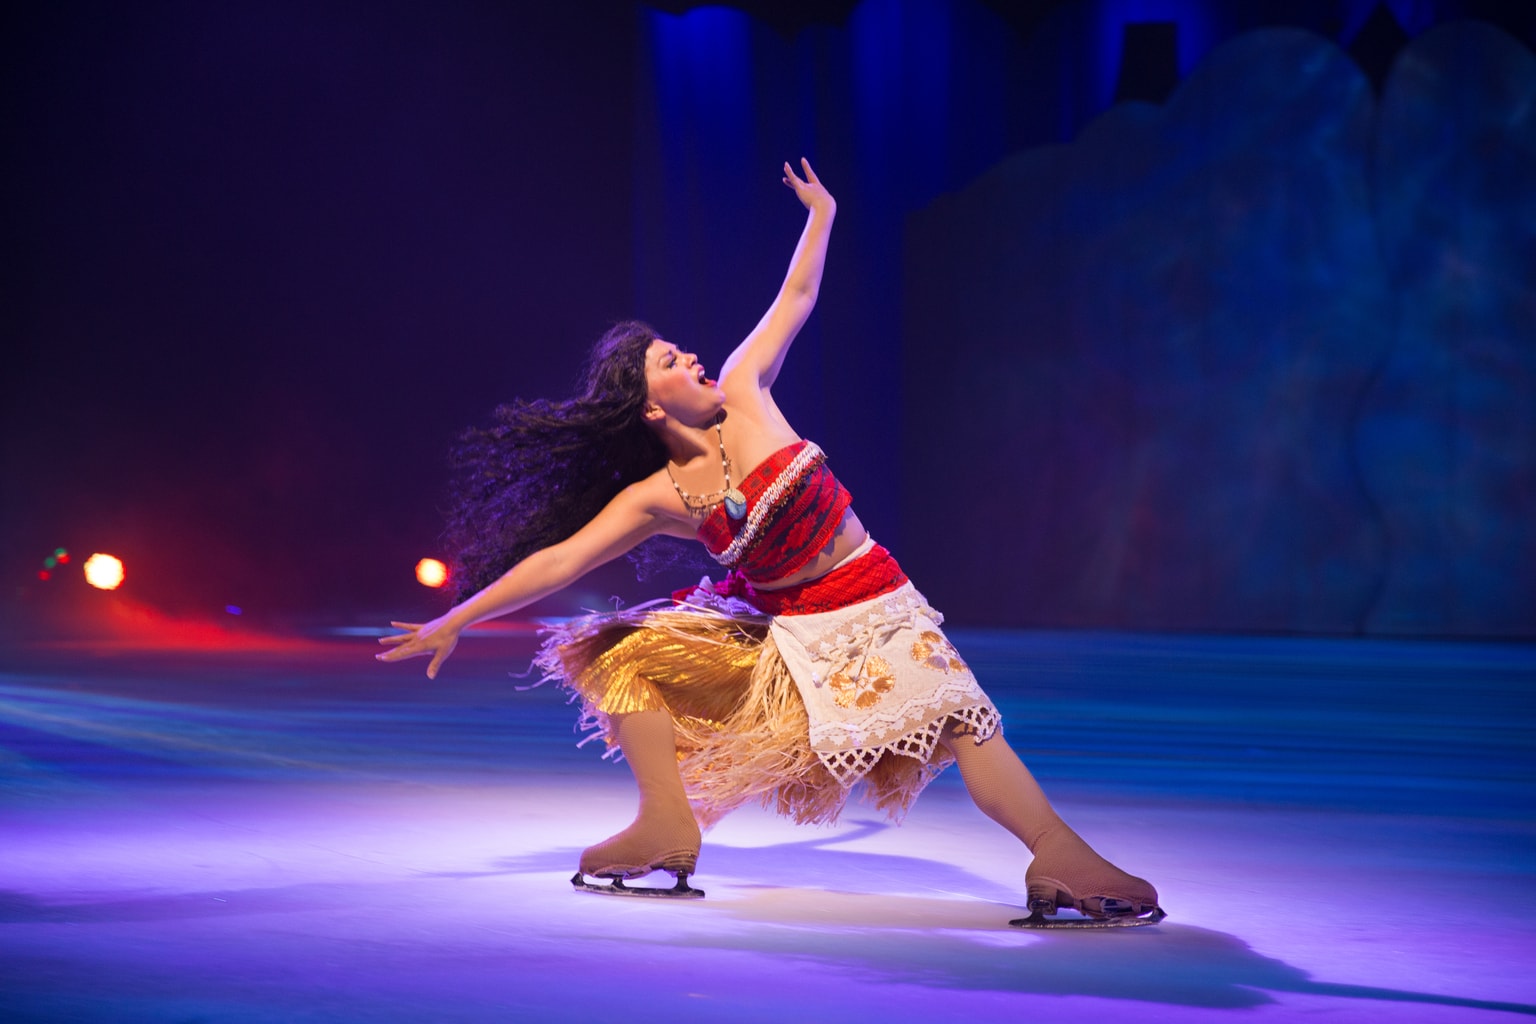 Disney On Ice in Portland through October 28 will make you Dare to Dream - Moana